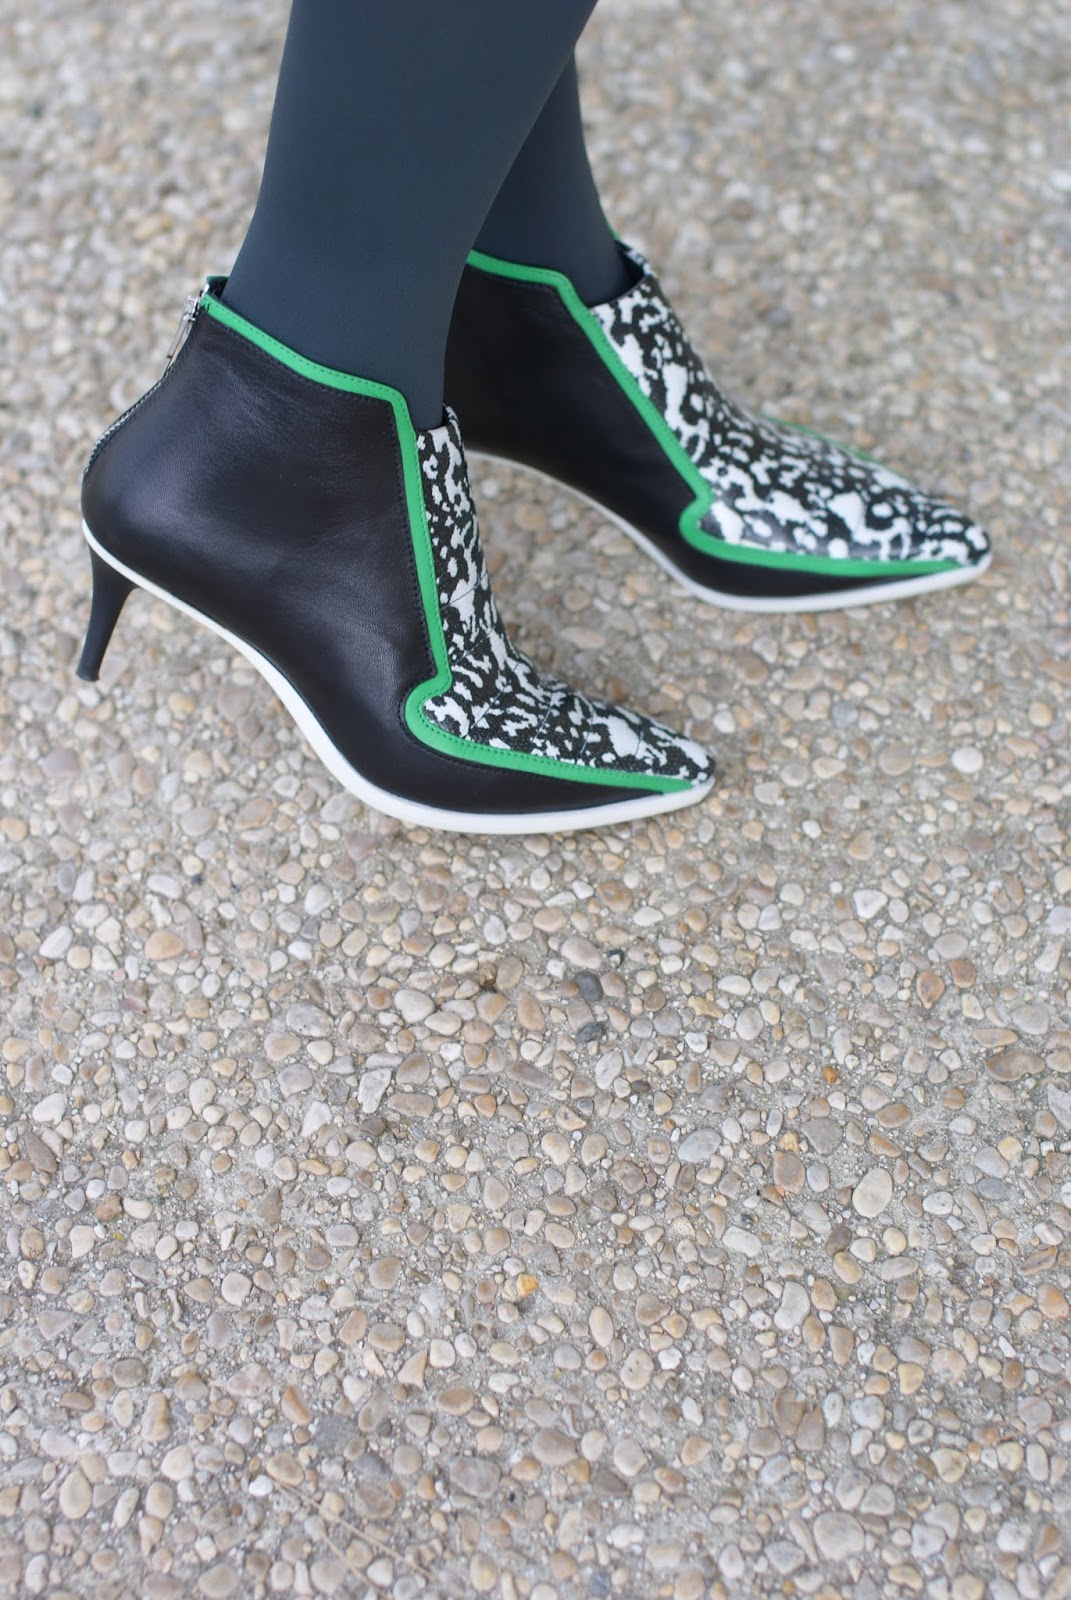 Alexander McQueen kitten heel ankle boots on Fashion and Cookies fashion blog